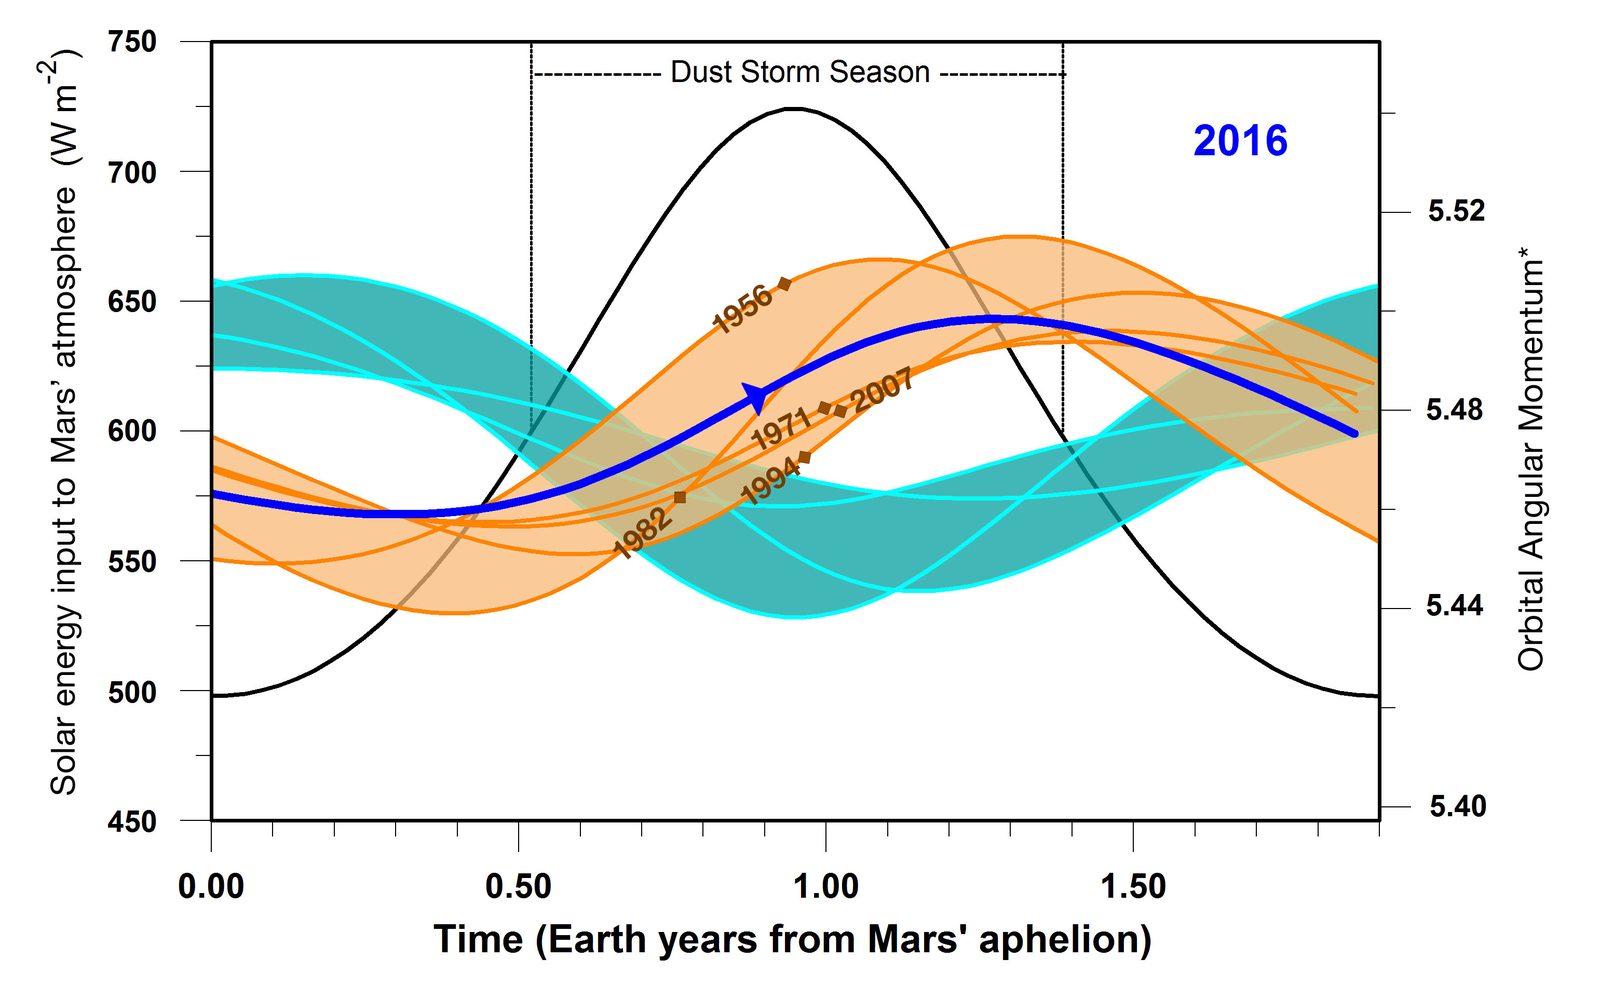 This graphic indicates a similarity between 2016 (dark blue line) and five past years in which Mars has experienced global dust storms (orange lines and band), compared to years with no global dust storm (blue-green lines and band). The horizontal scale is time-of-year on Mars